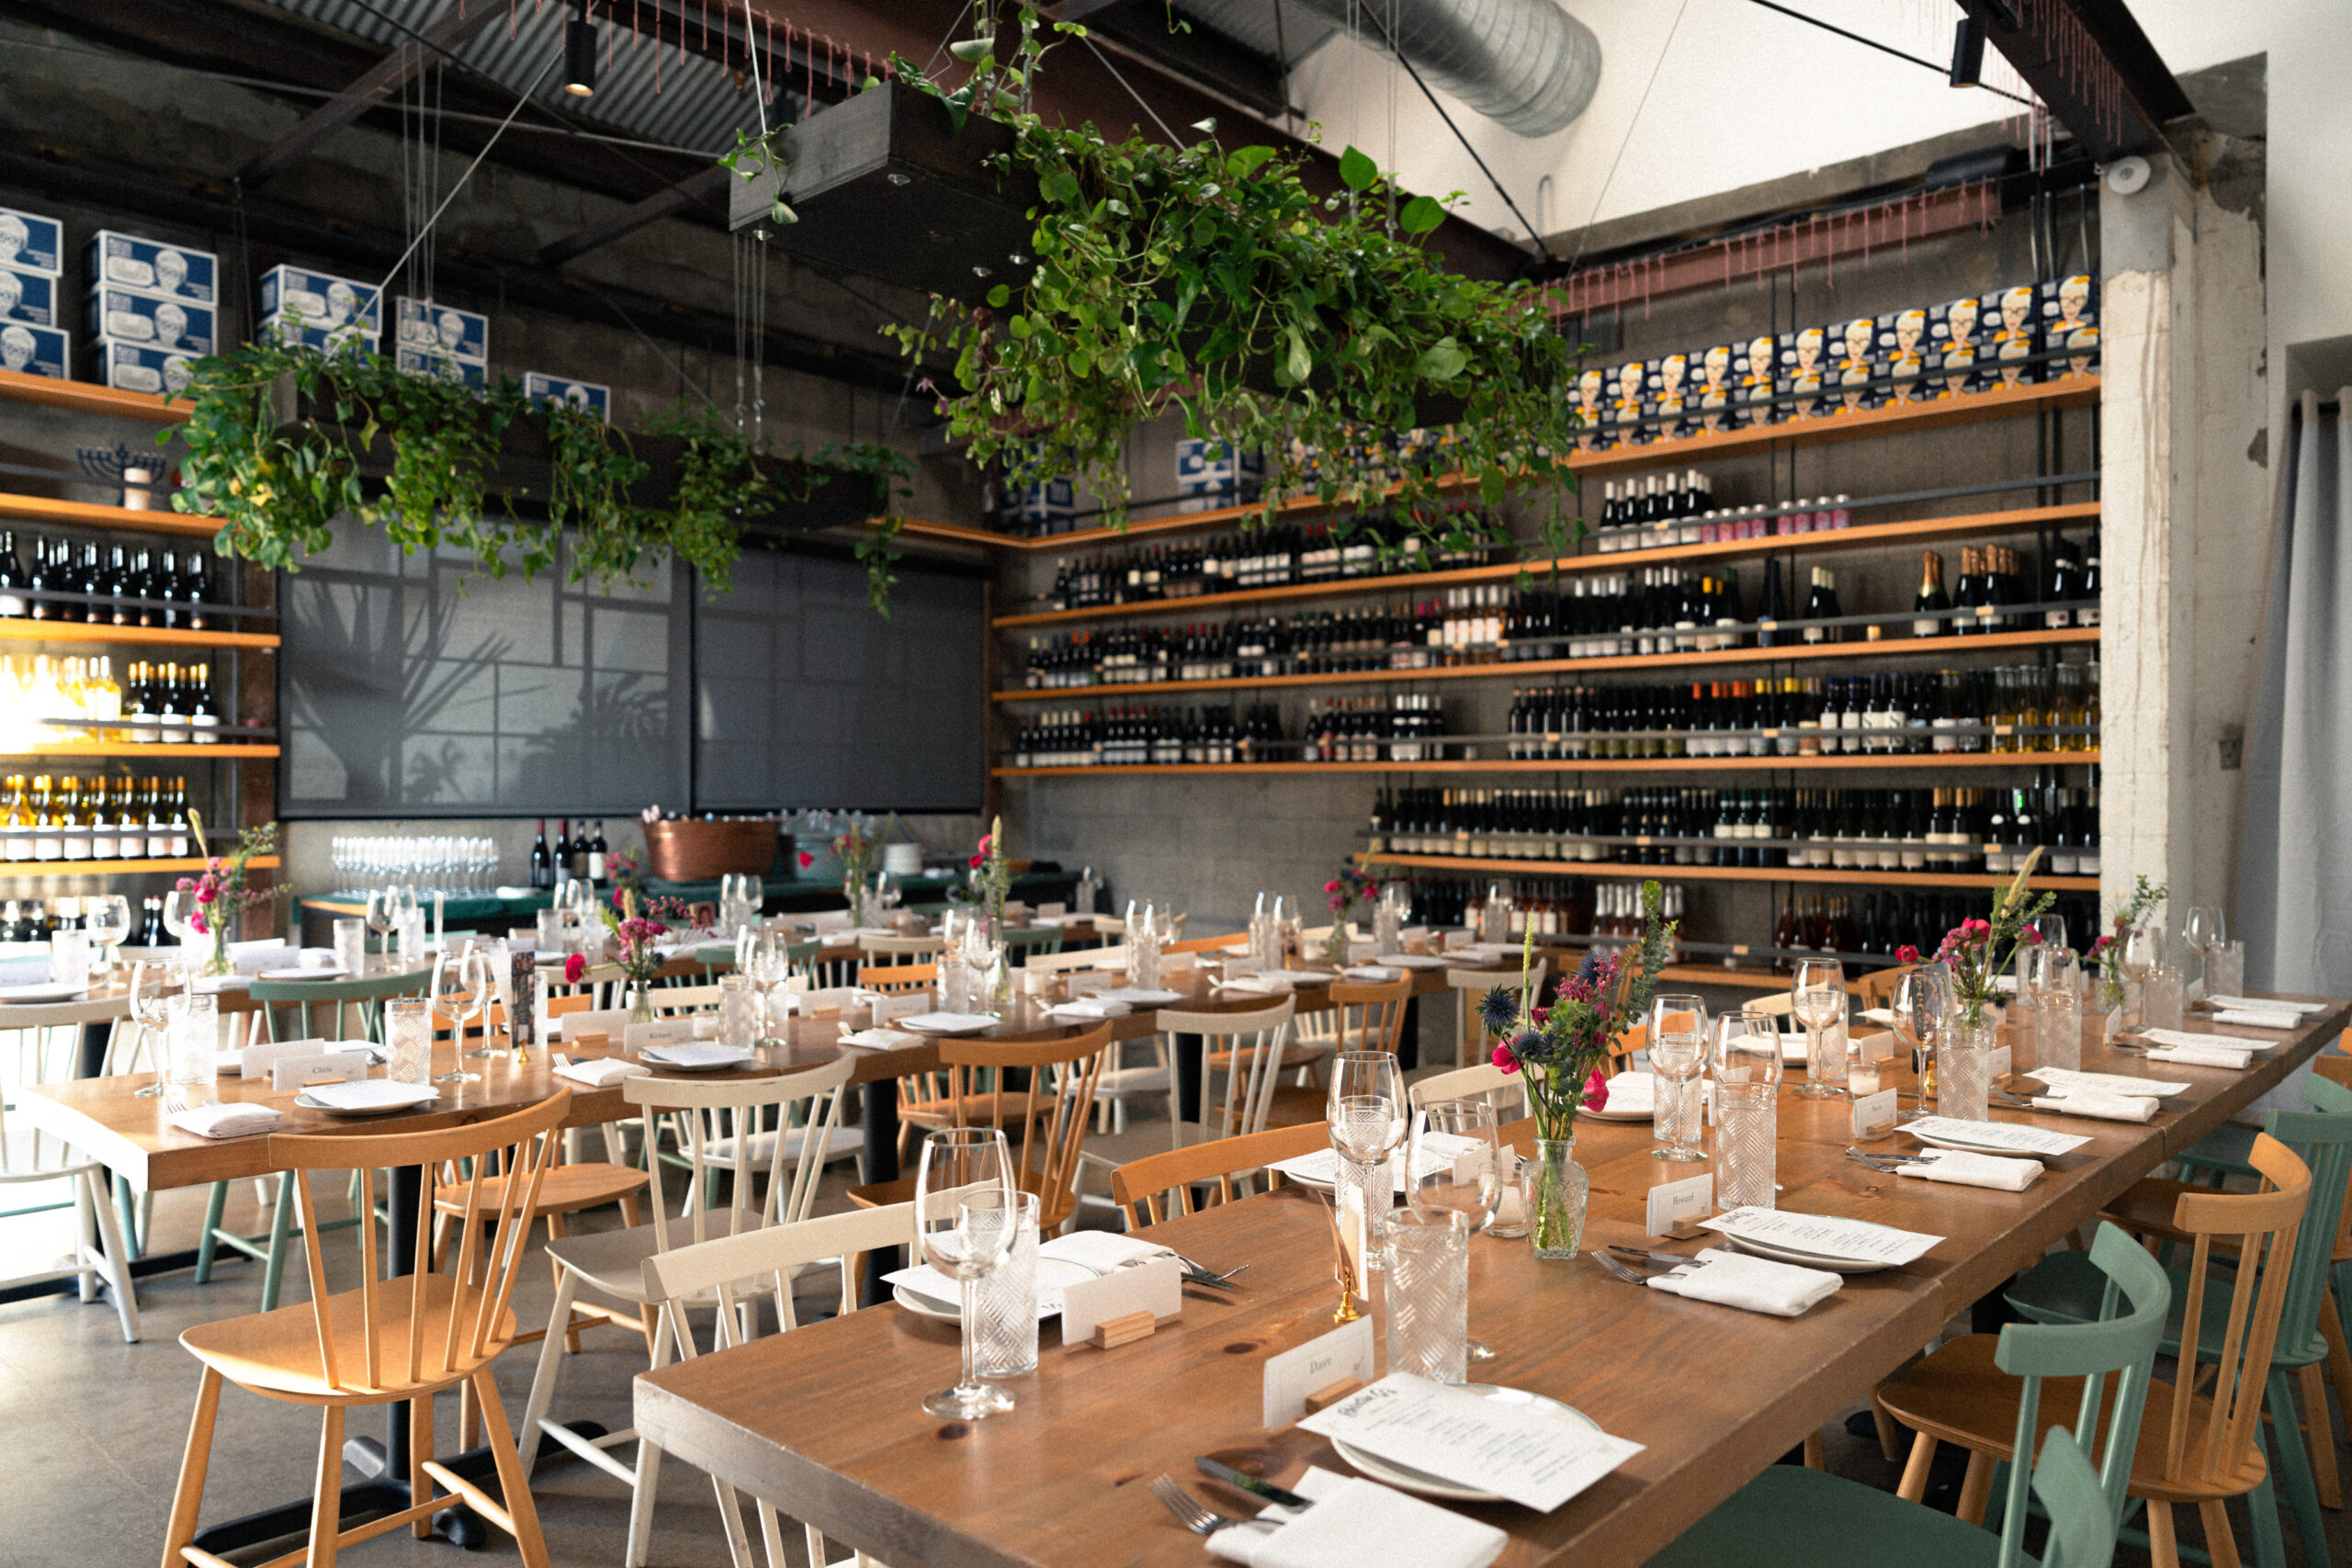 beautifully set tables with fresh flowers, green plants hanging from the ceiling and bottles of wine against the wall